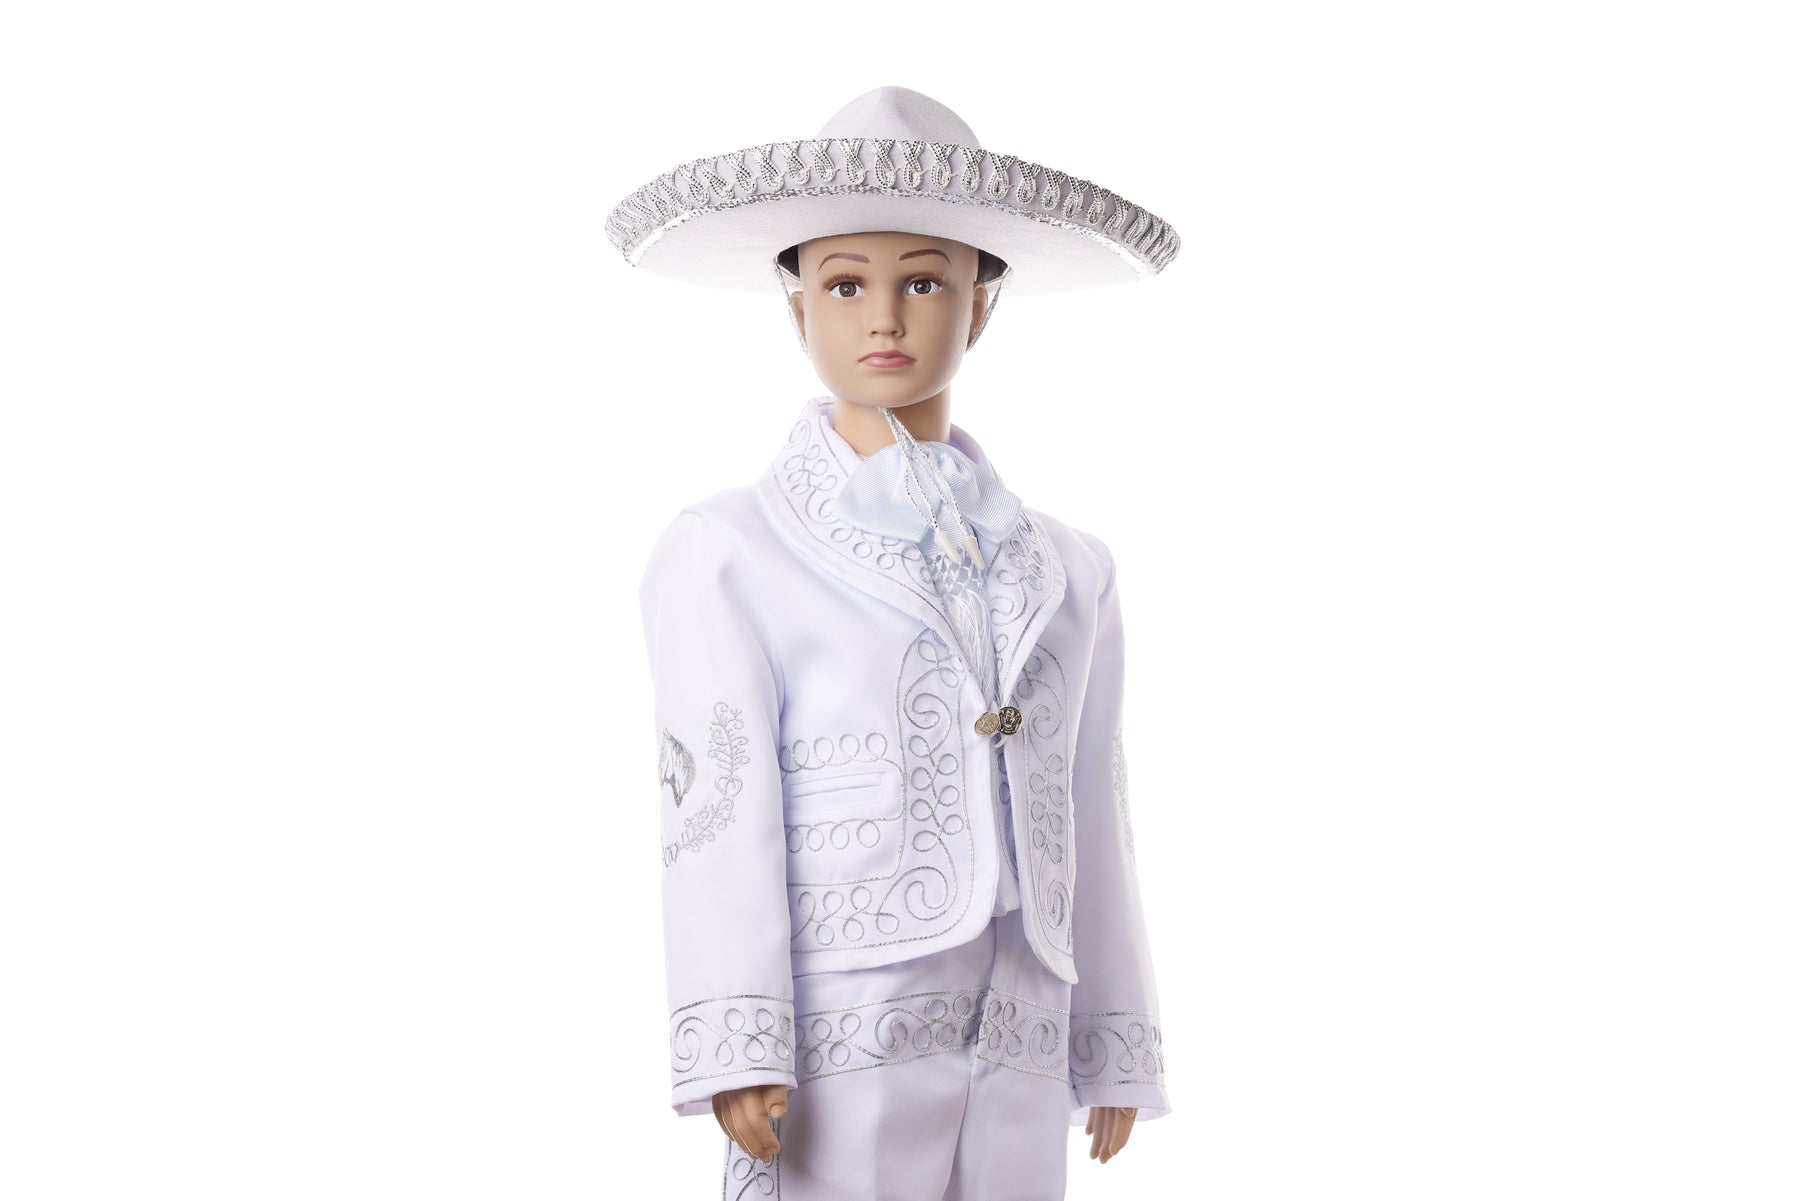 Boys Charro Baptism Outfit - White / Silver - Horse